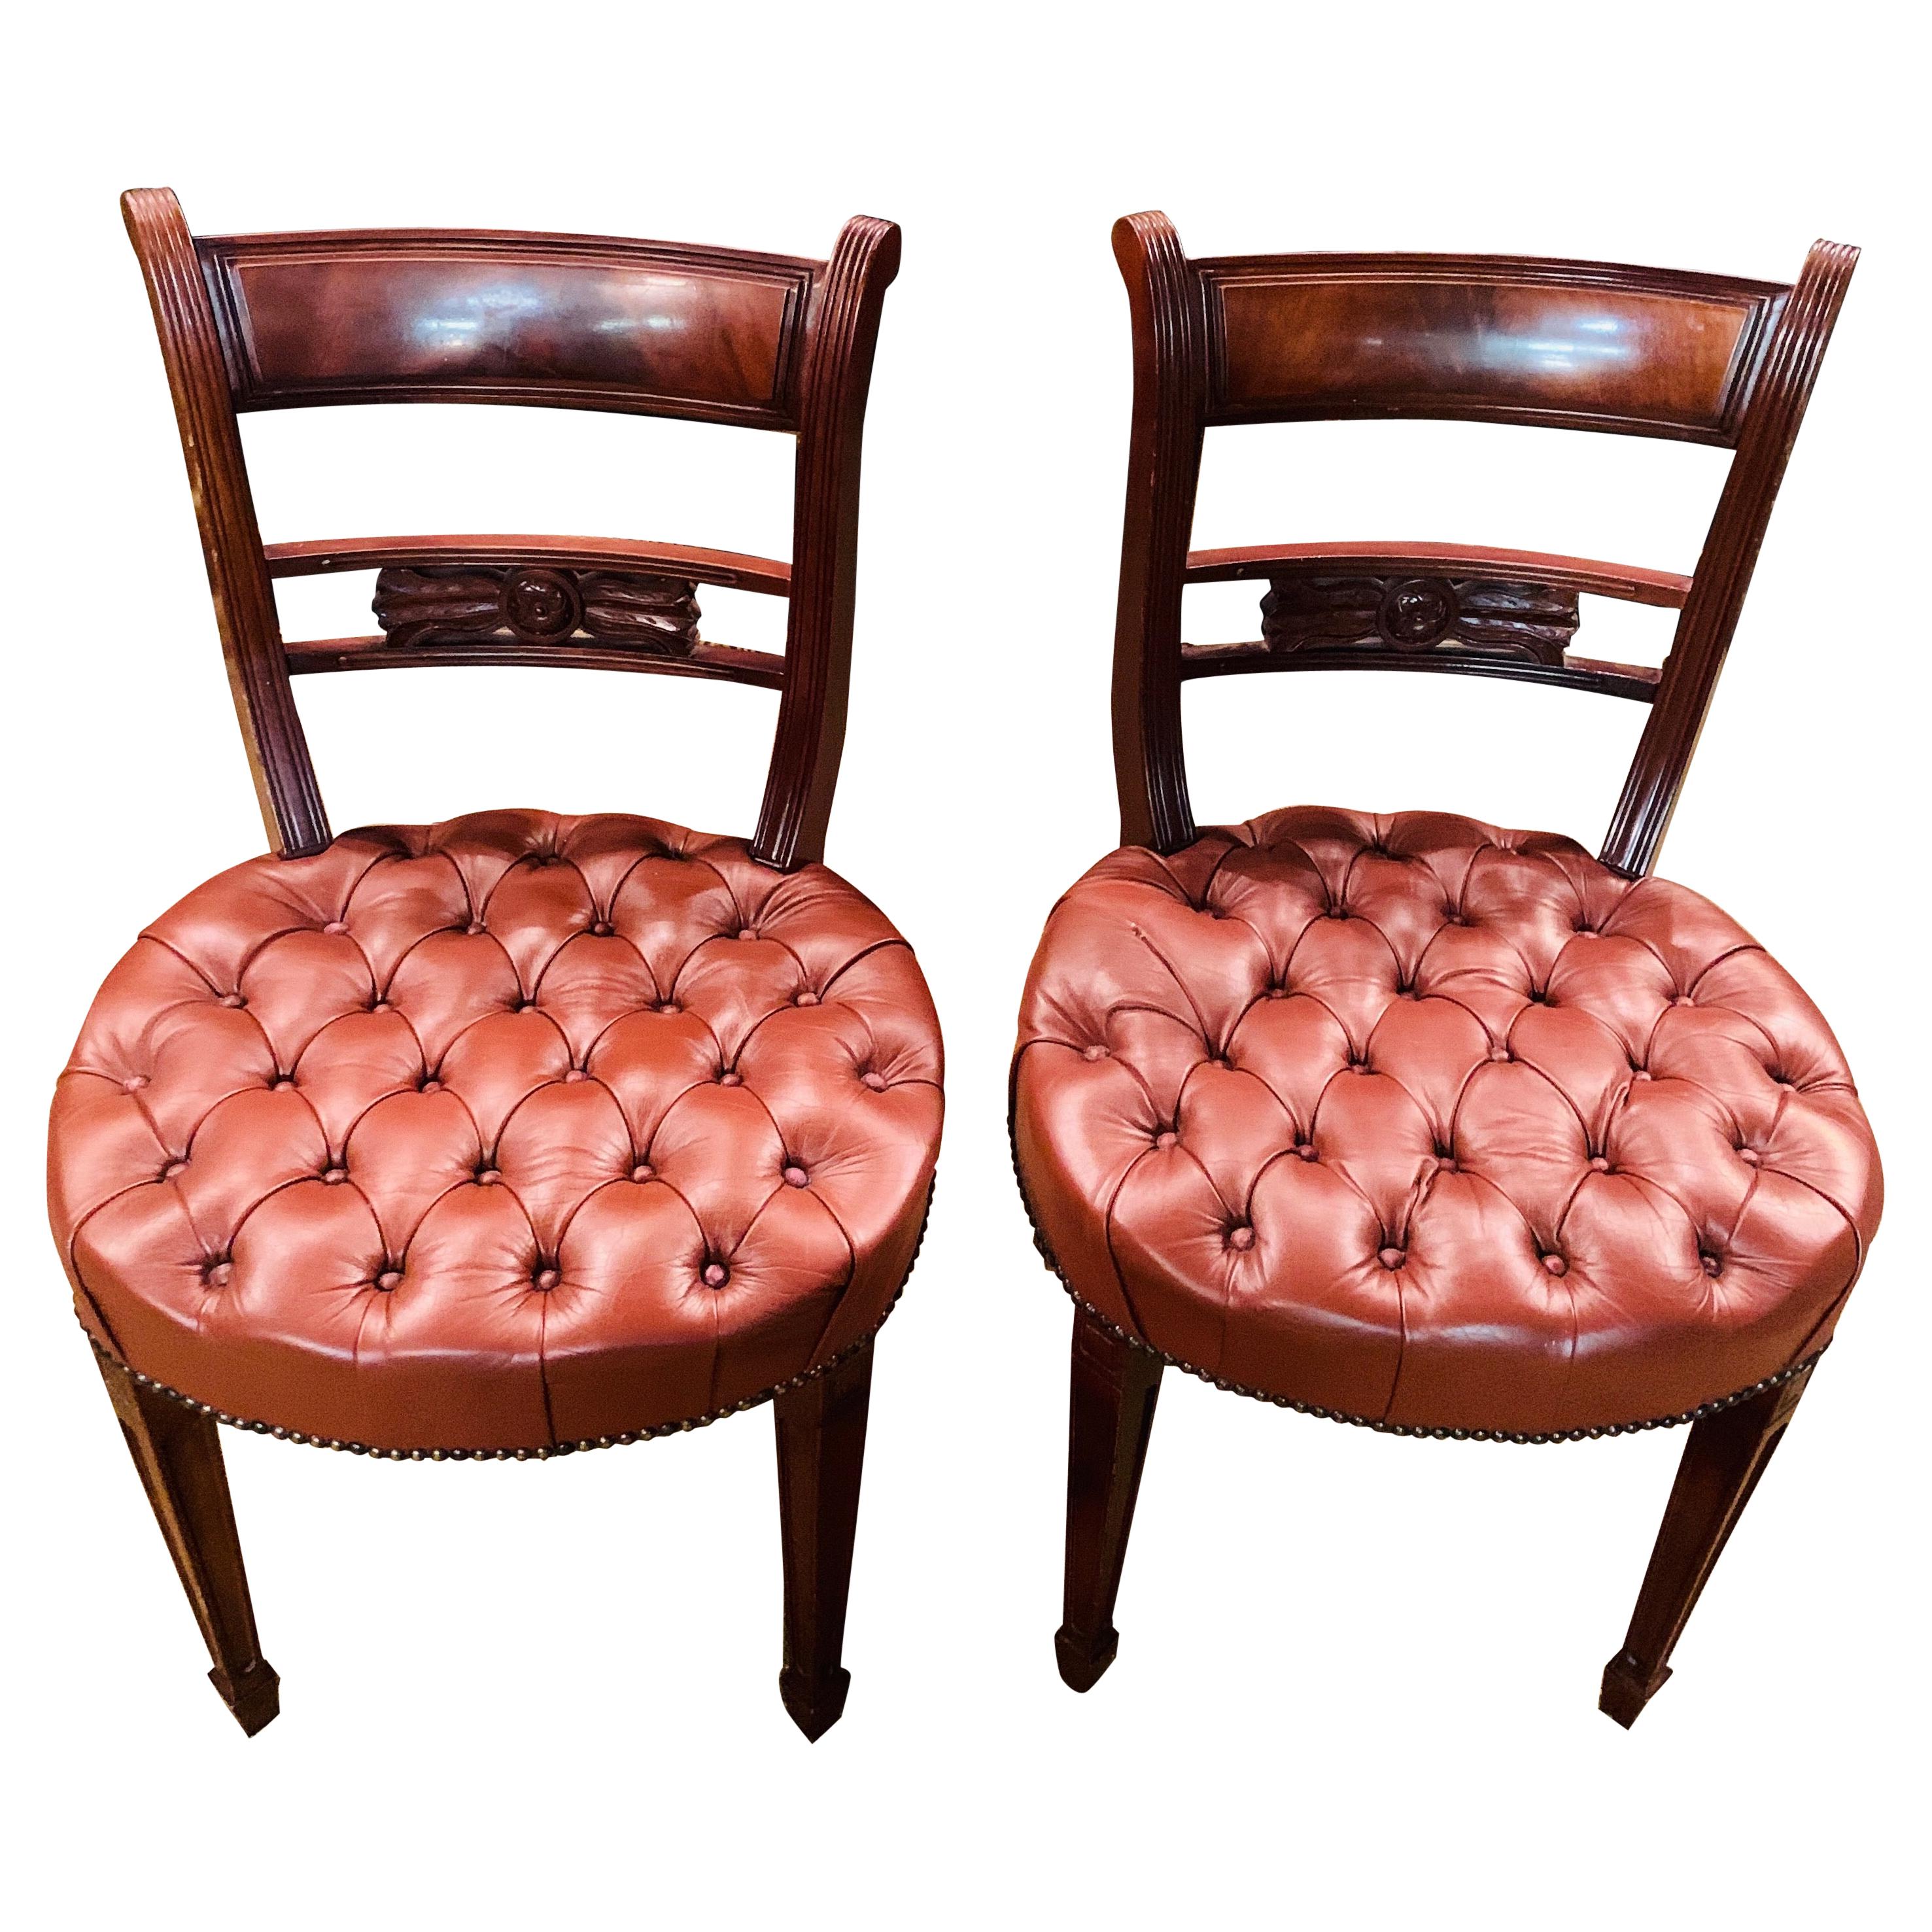 two Original Exclusive Chesterfield Chairs read leather 